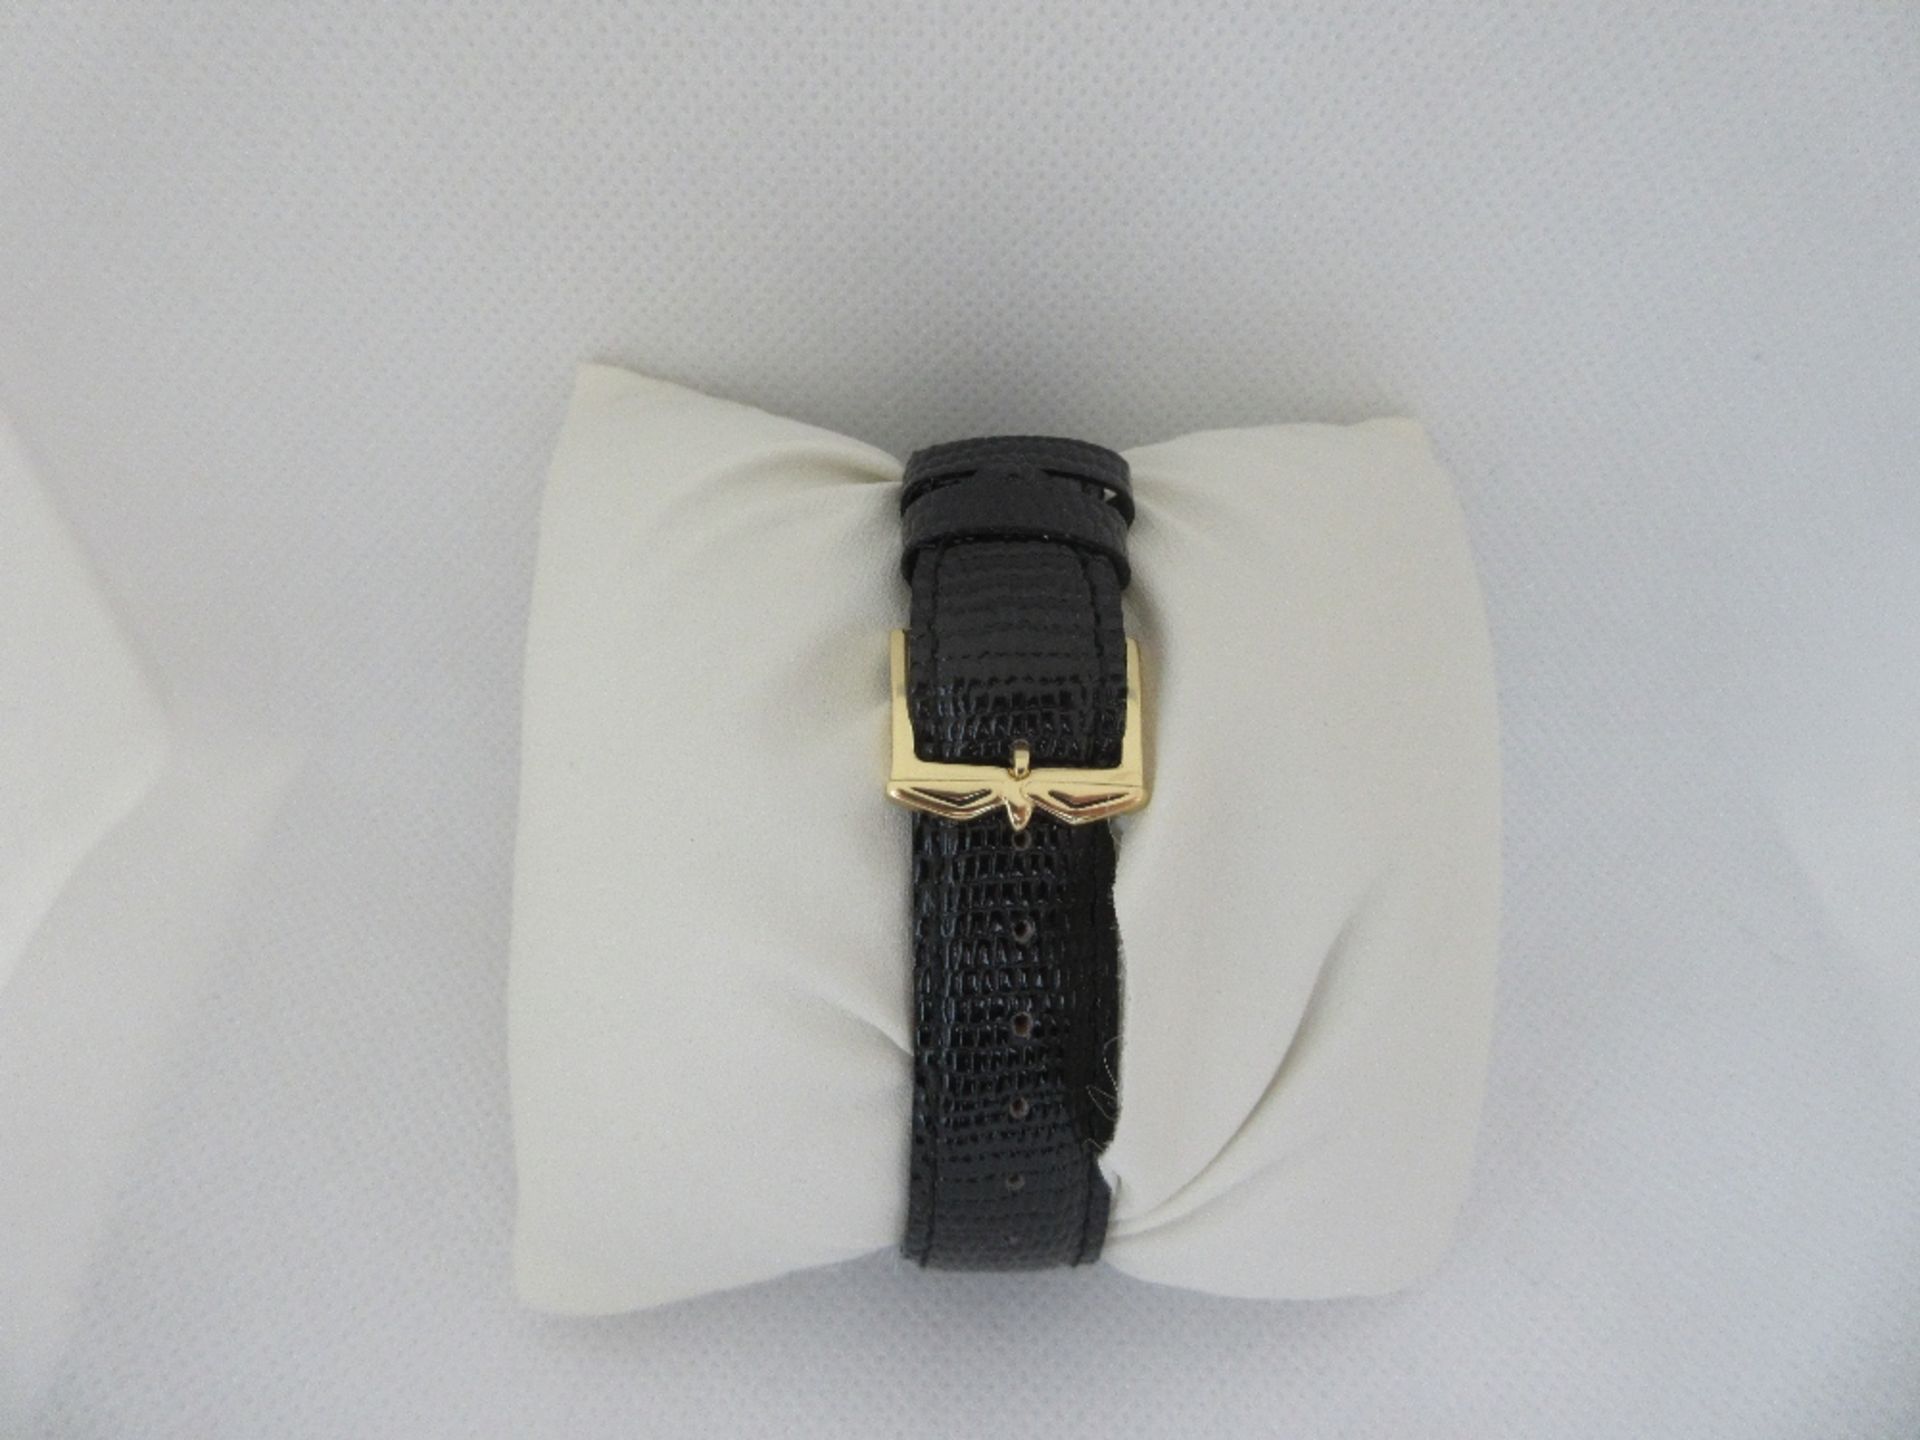 ROTARY MALE WATCH, MODEL GS02283/01S, CASE DIAMETER 28MM, LEATHER STRAP, BOXED - Image 3 of 4